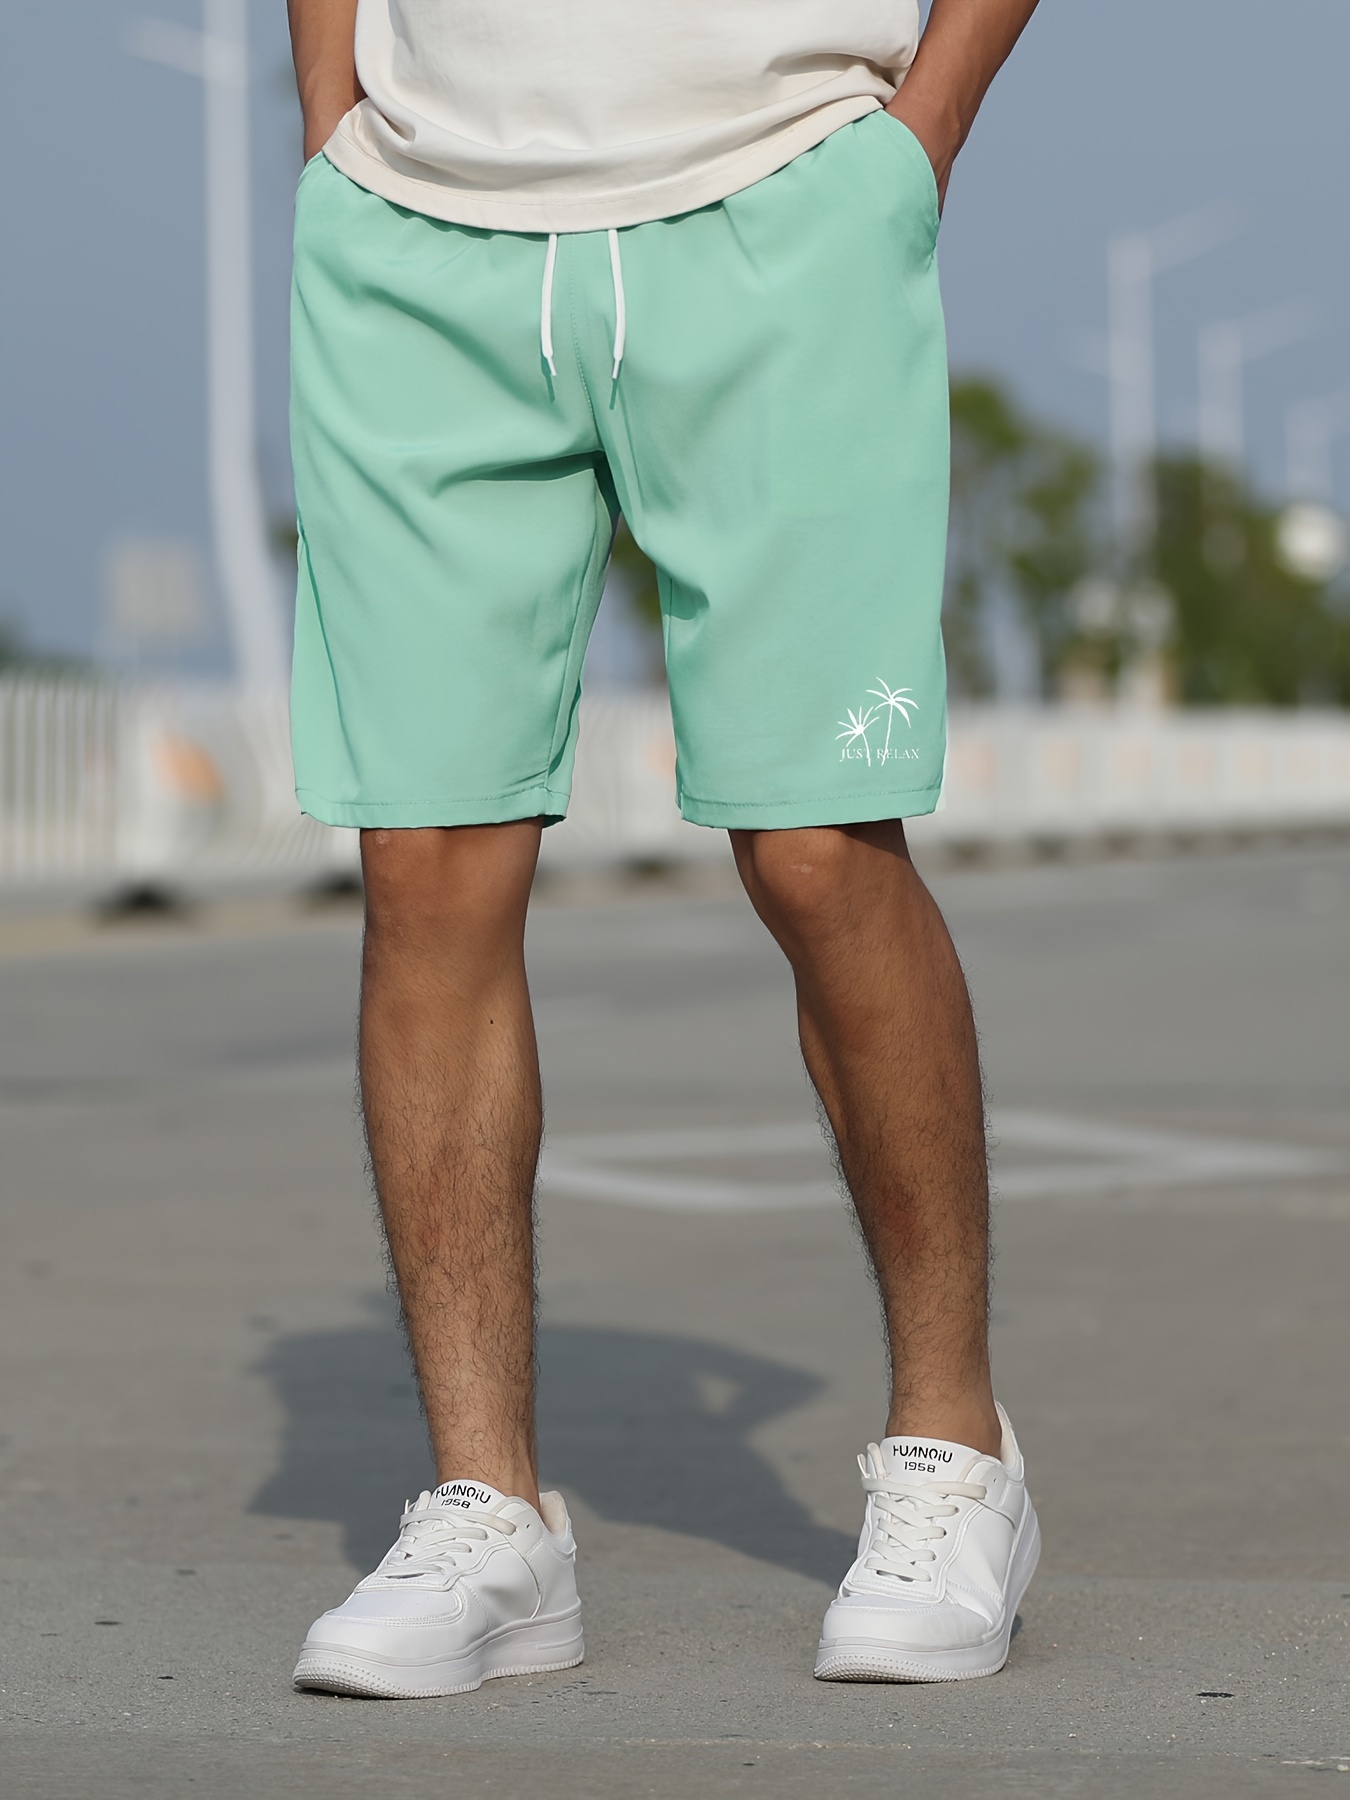 men's workout shorts  Mens workout shorts, Workout clothes, Fitness fashion